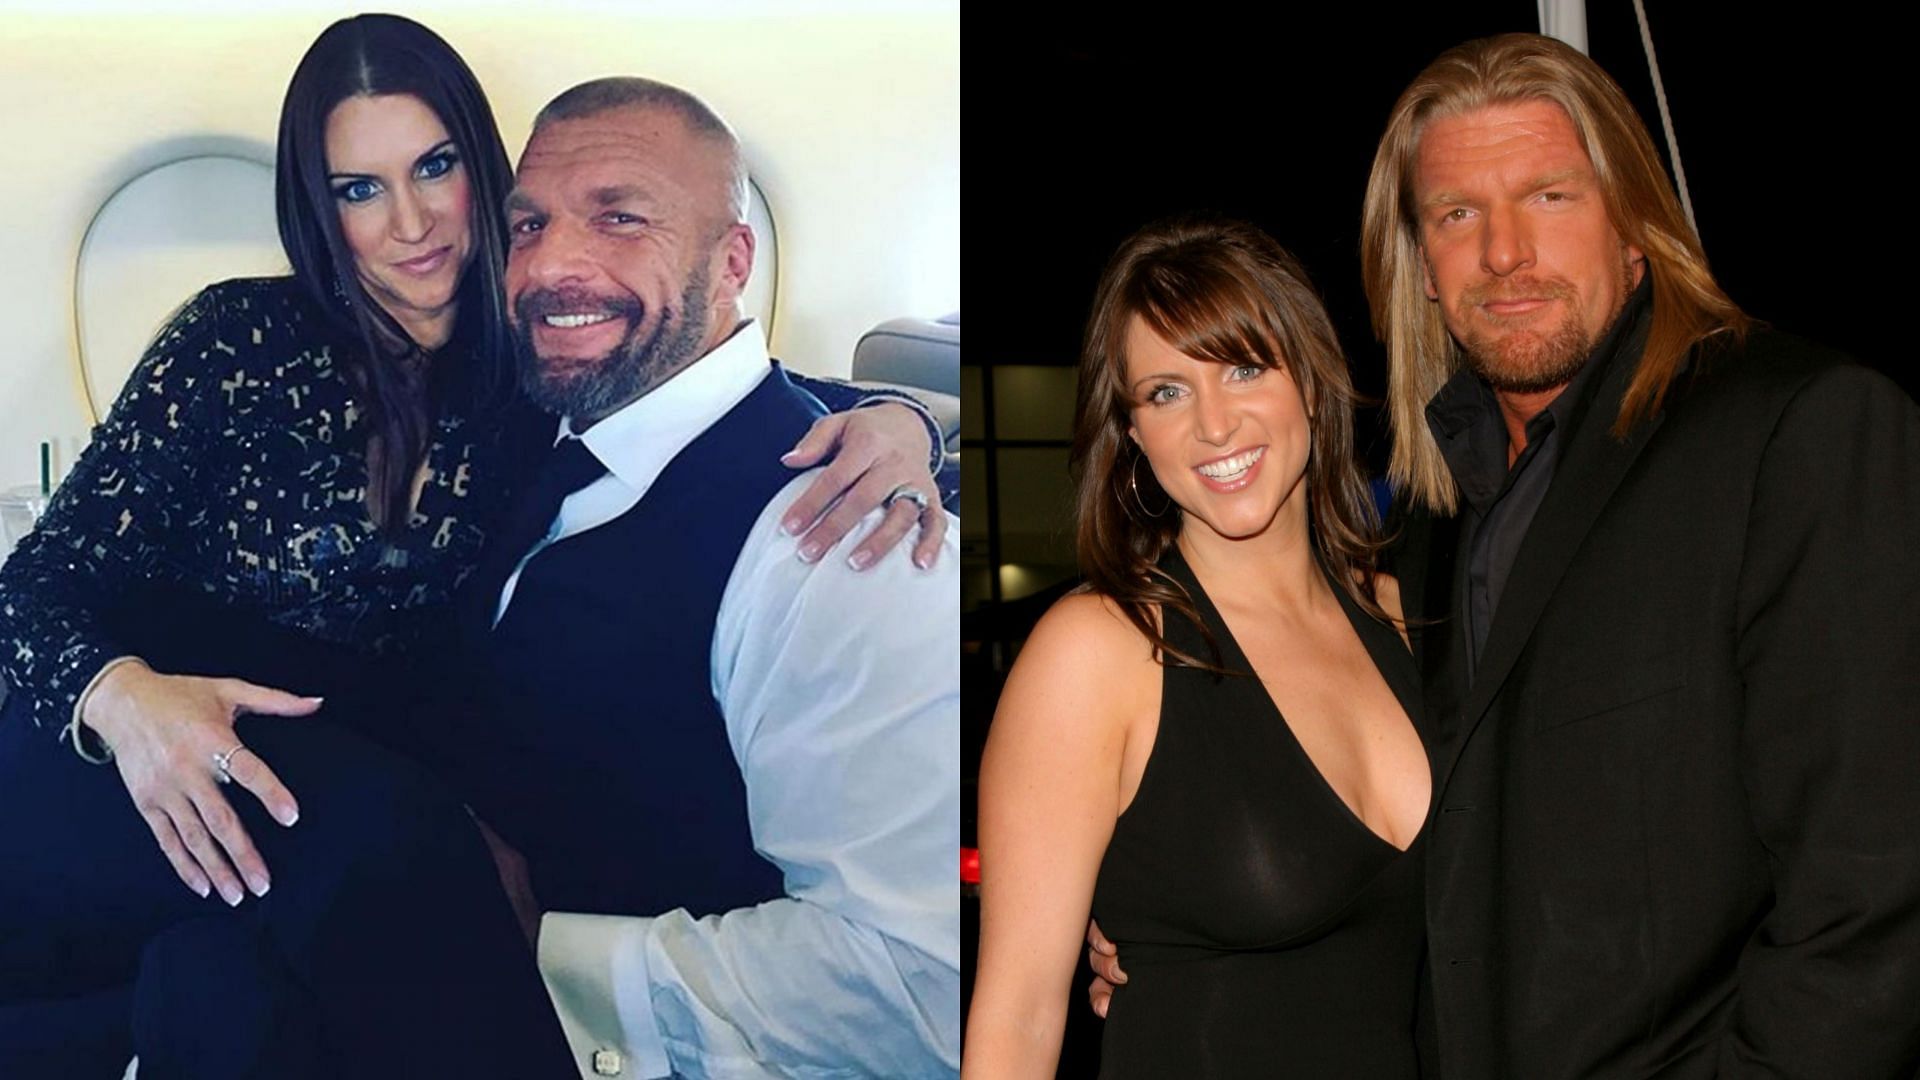 These stunning photos of WWE star Stephanie McMahon prove that age